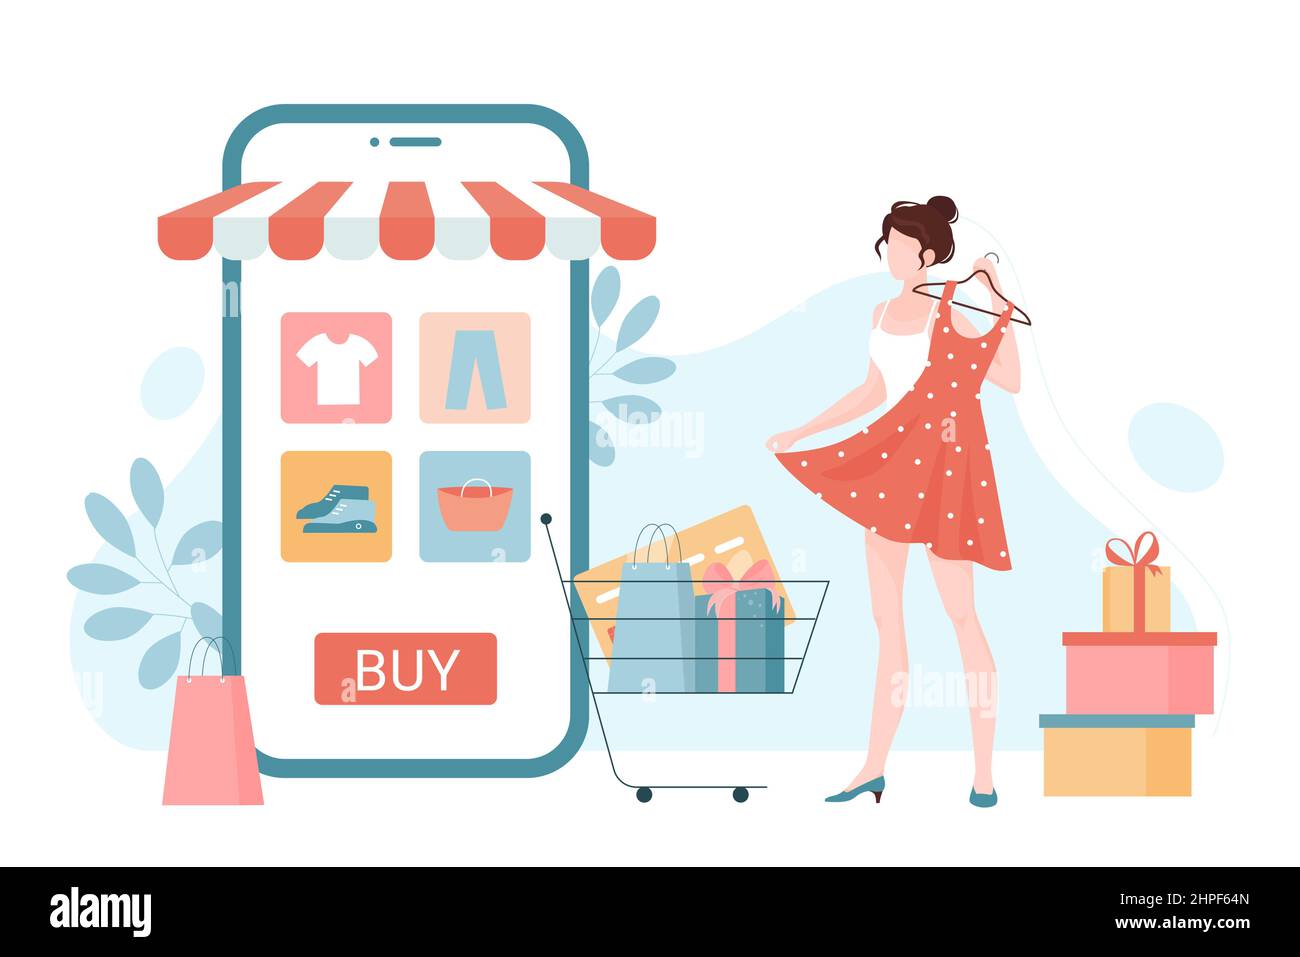 Online commerce, retail fashion store or marketplace app and customer with purchases. Tiny woman shopping to buy clothes via mobile phone flat vector illustration. Digital marketing, sales concept Stock Vector